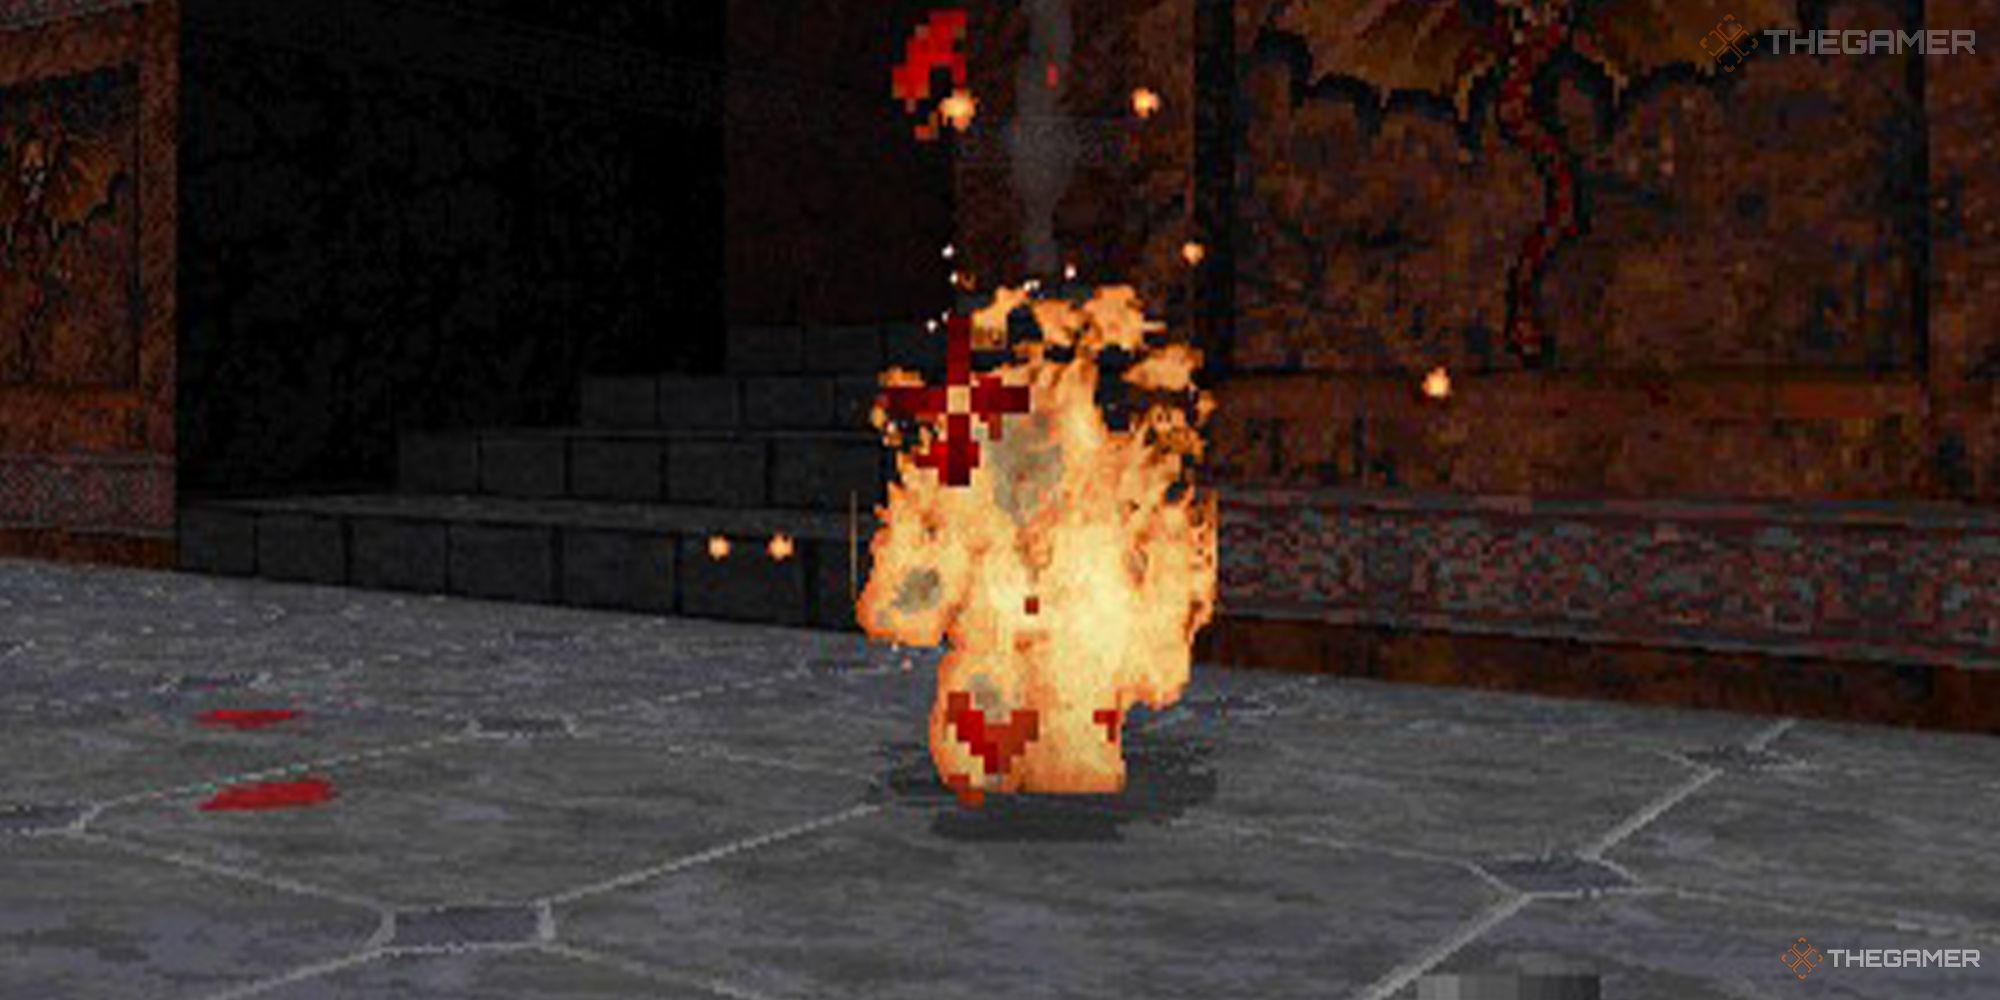 Blood enemy on fire, running from a staircase in front of a dragon mural